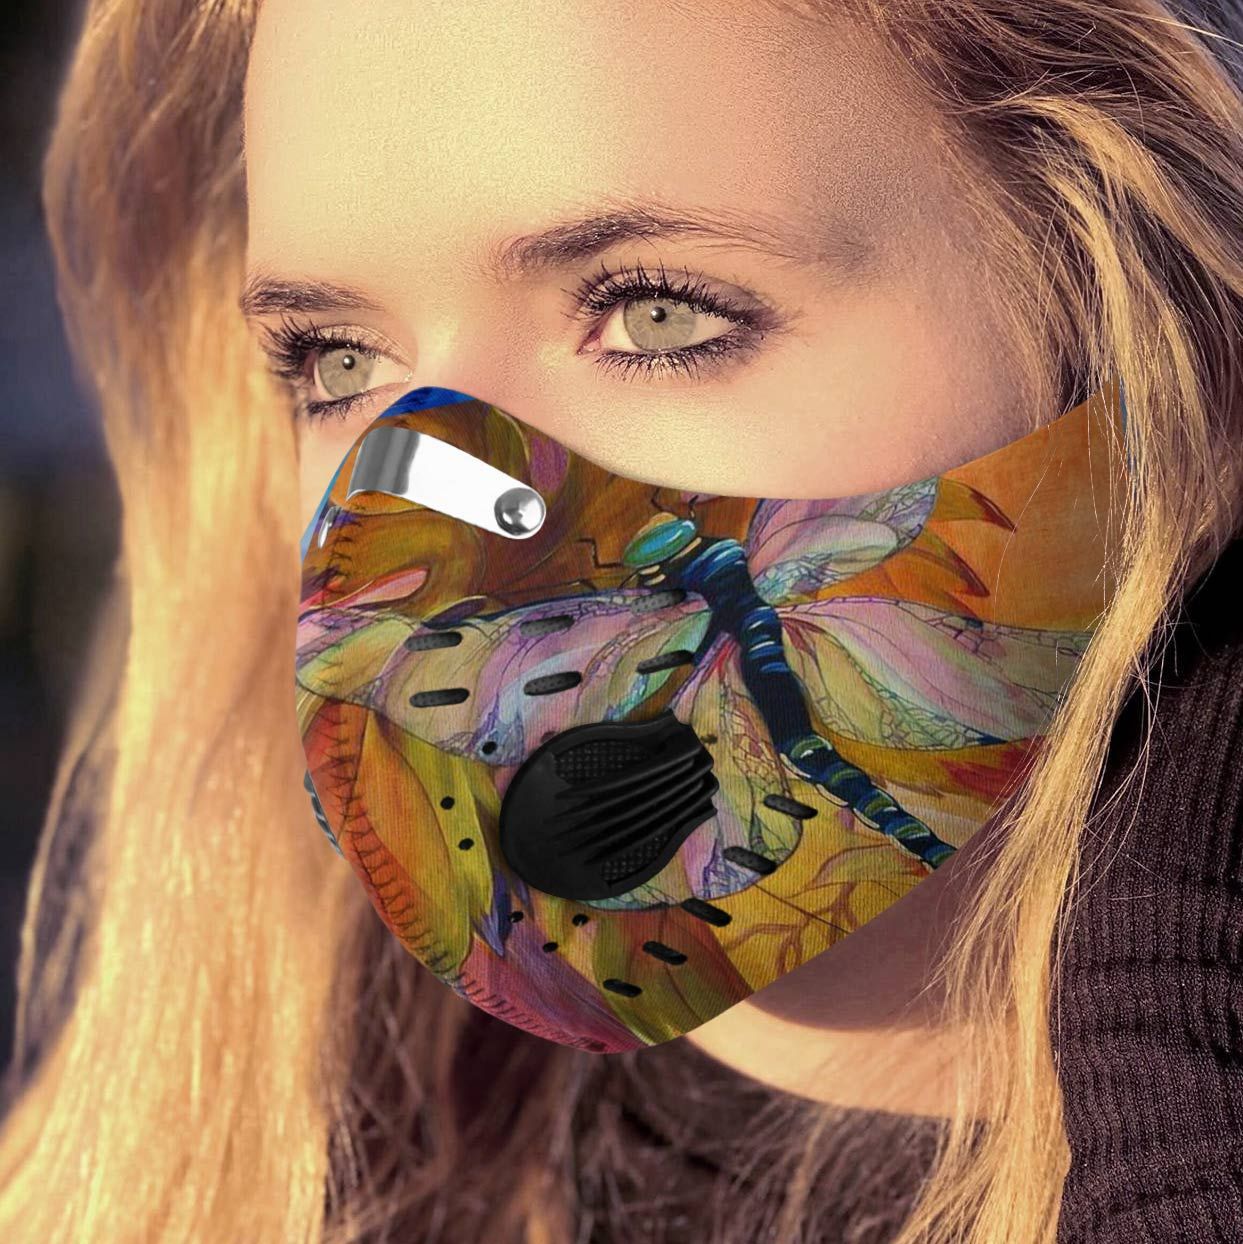 Dragonfly lover carbon pm 2.5 face mask